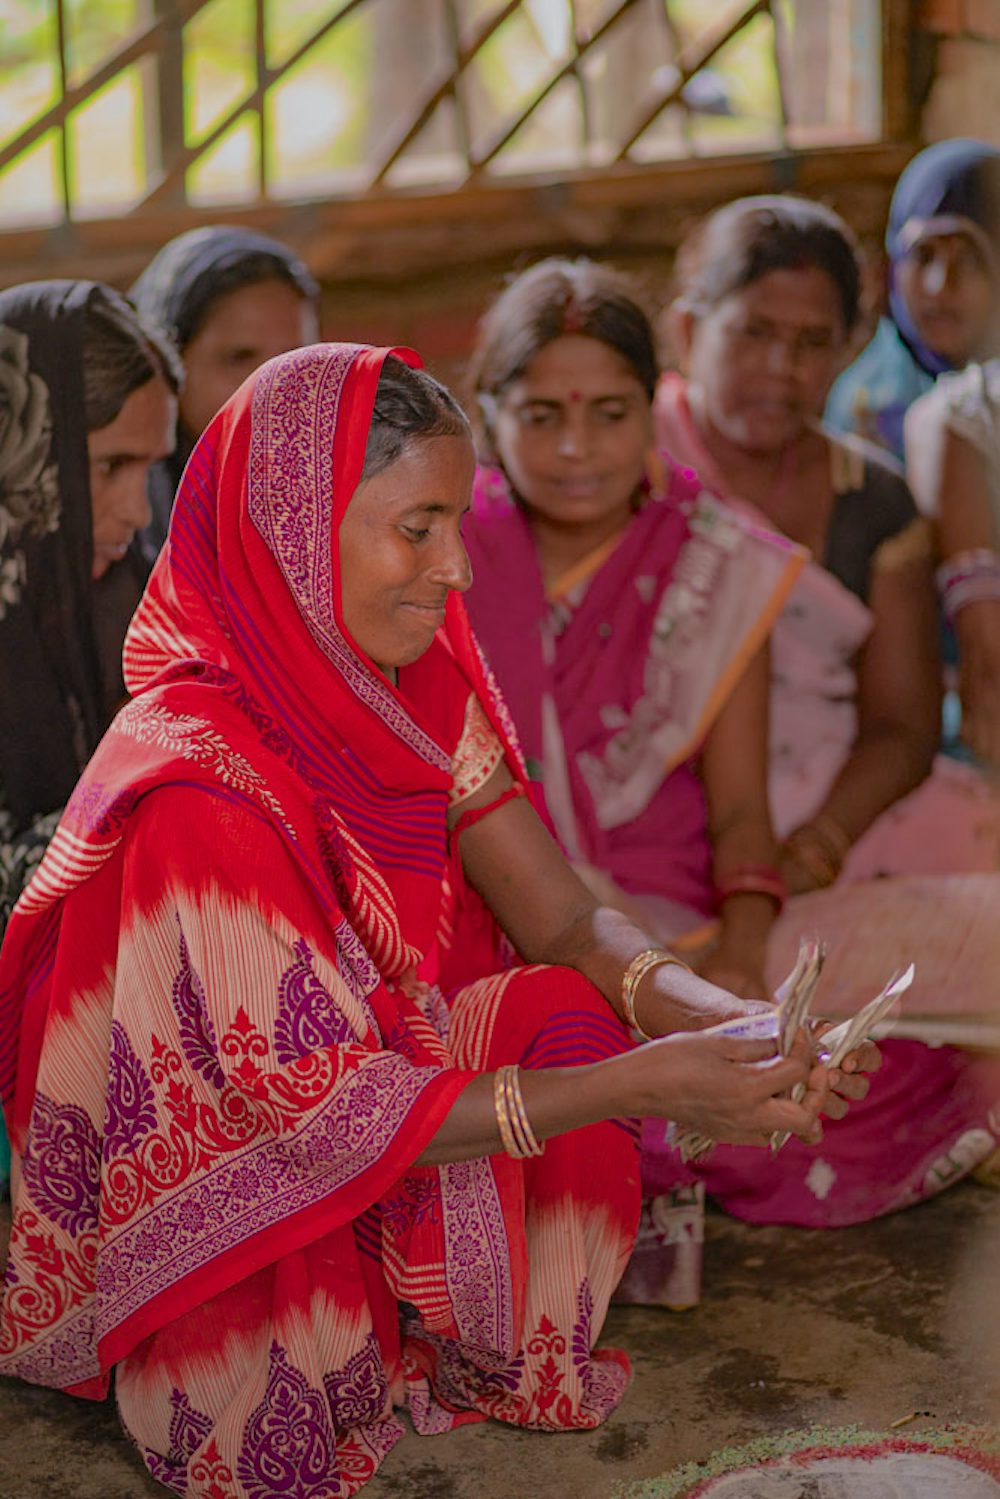 A woman in a red and pink saree counts money, focusing intently, with other women seated around her in a semi-circle.